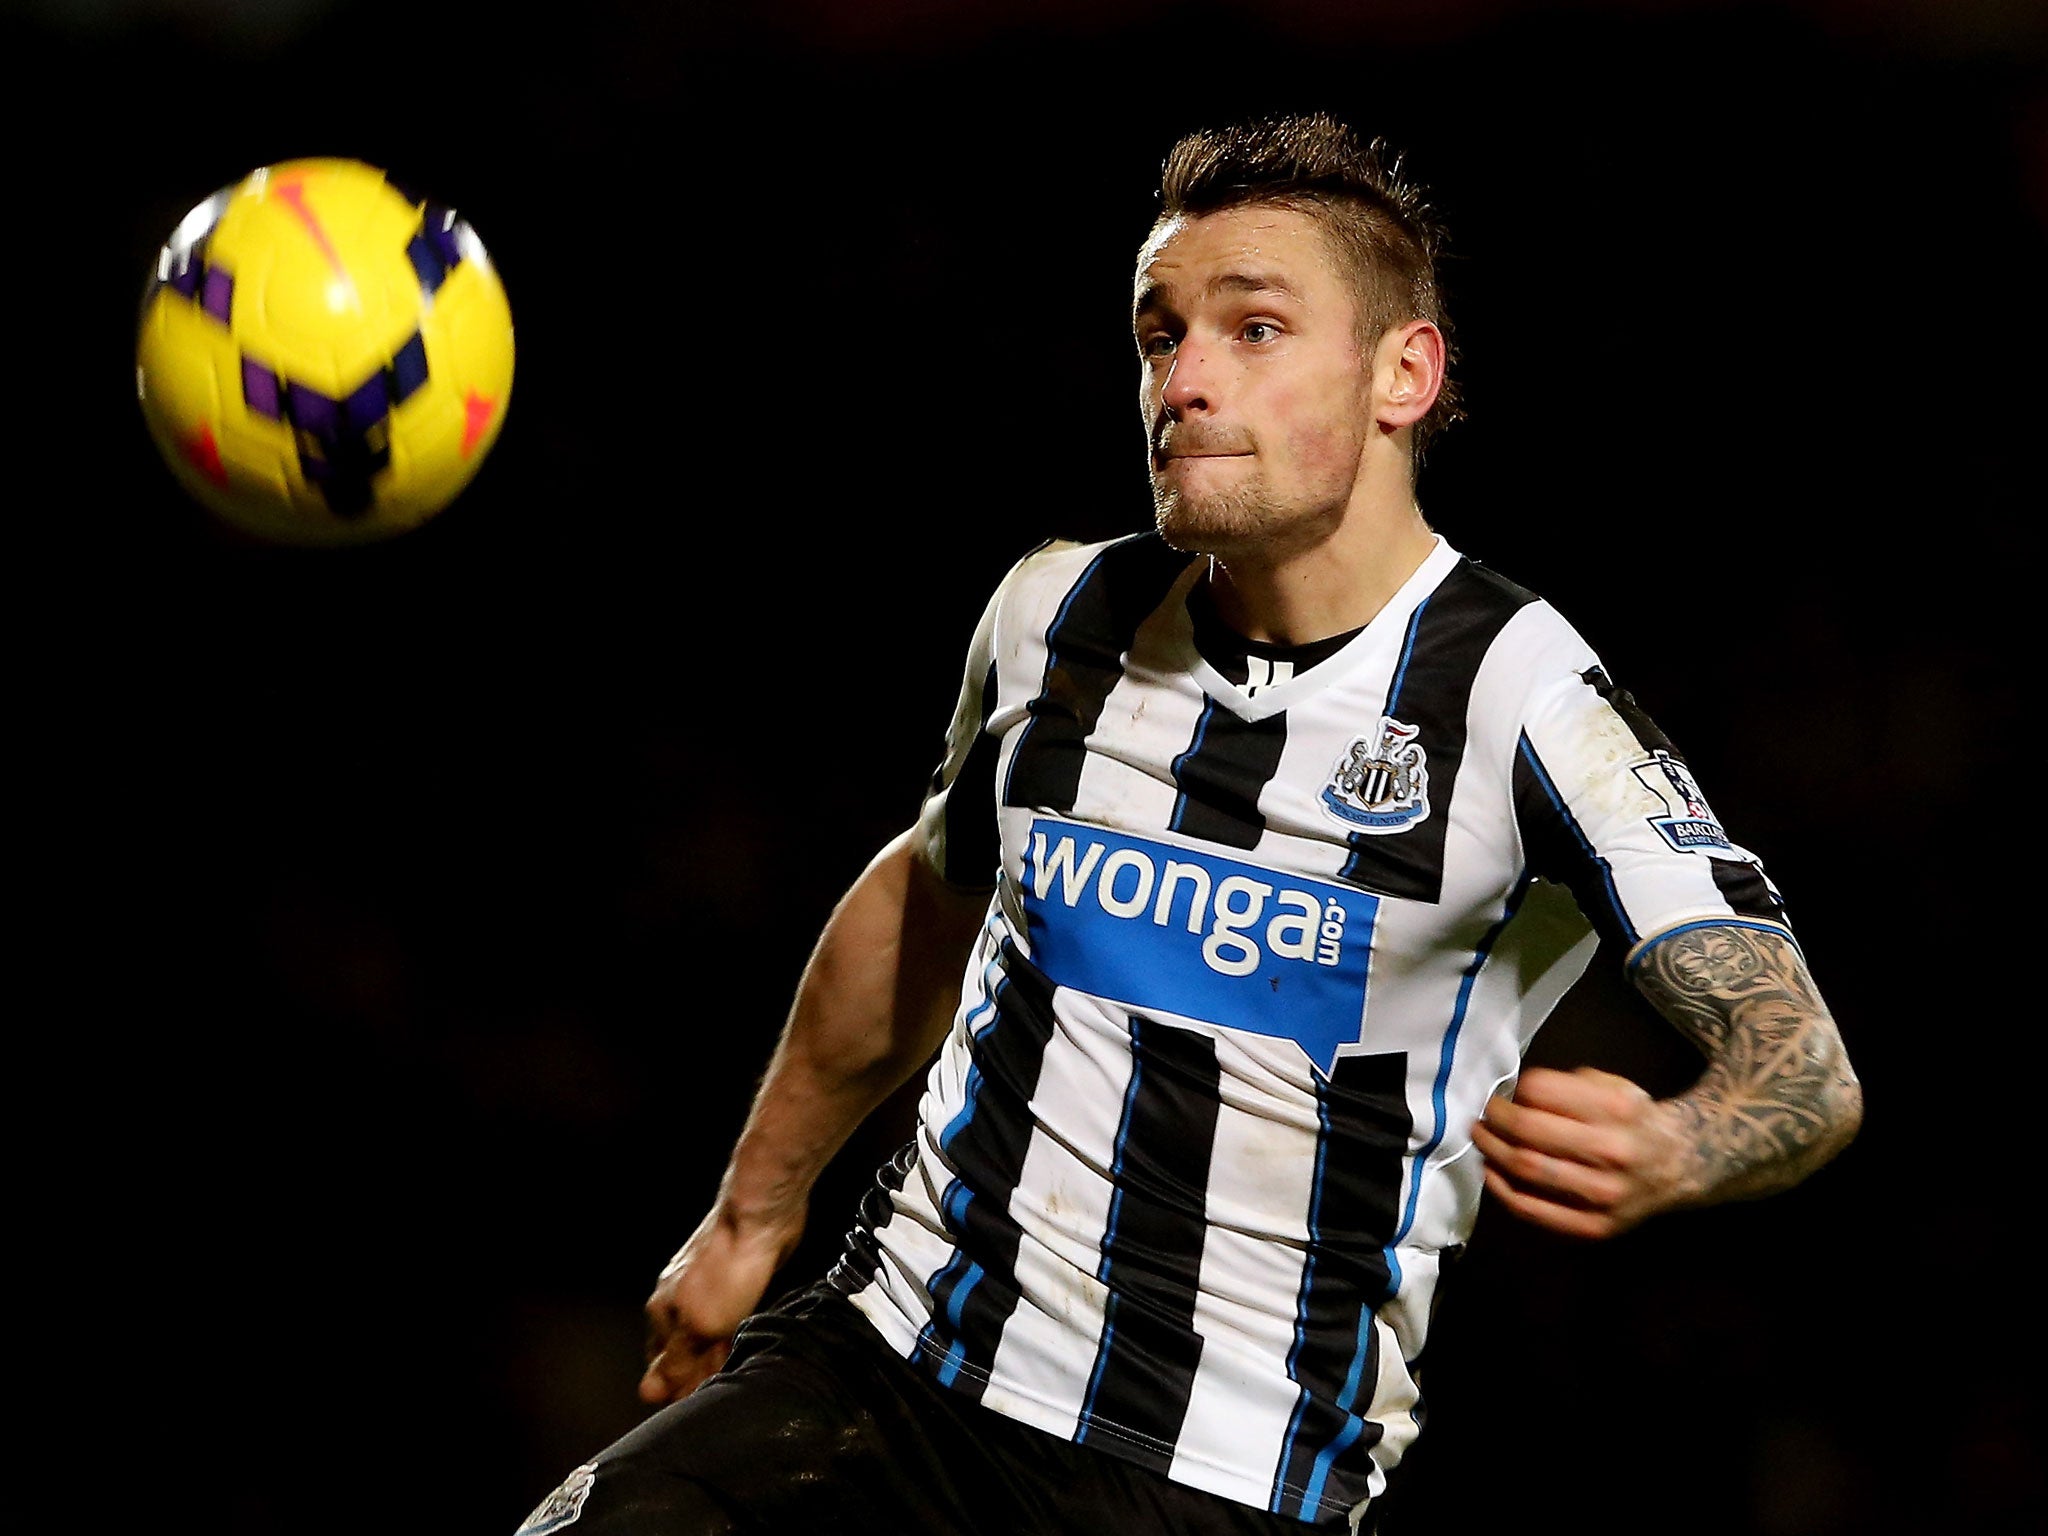 Mathieu Debuchy is close to a move to Arsenal, but who will he be competing with for a spot in the first-team?